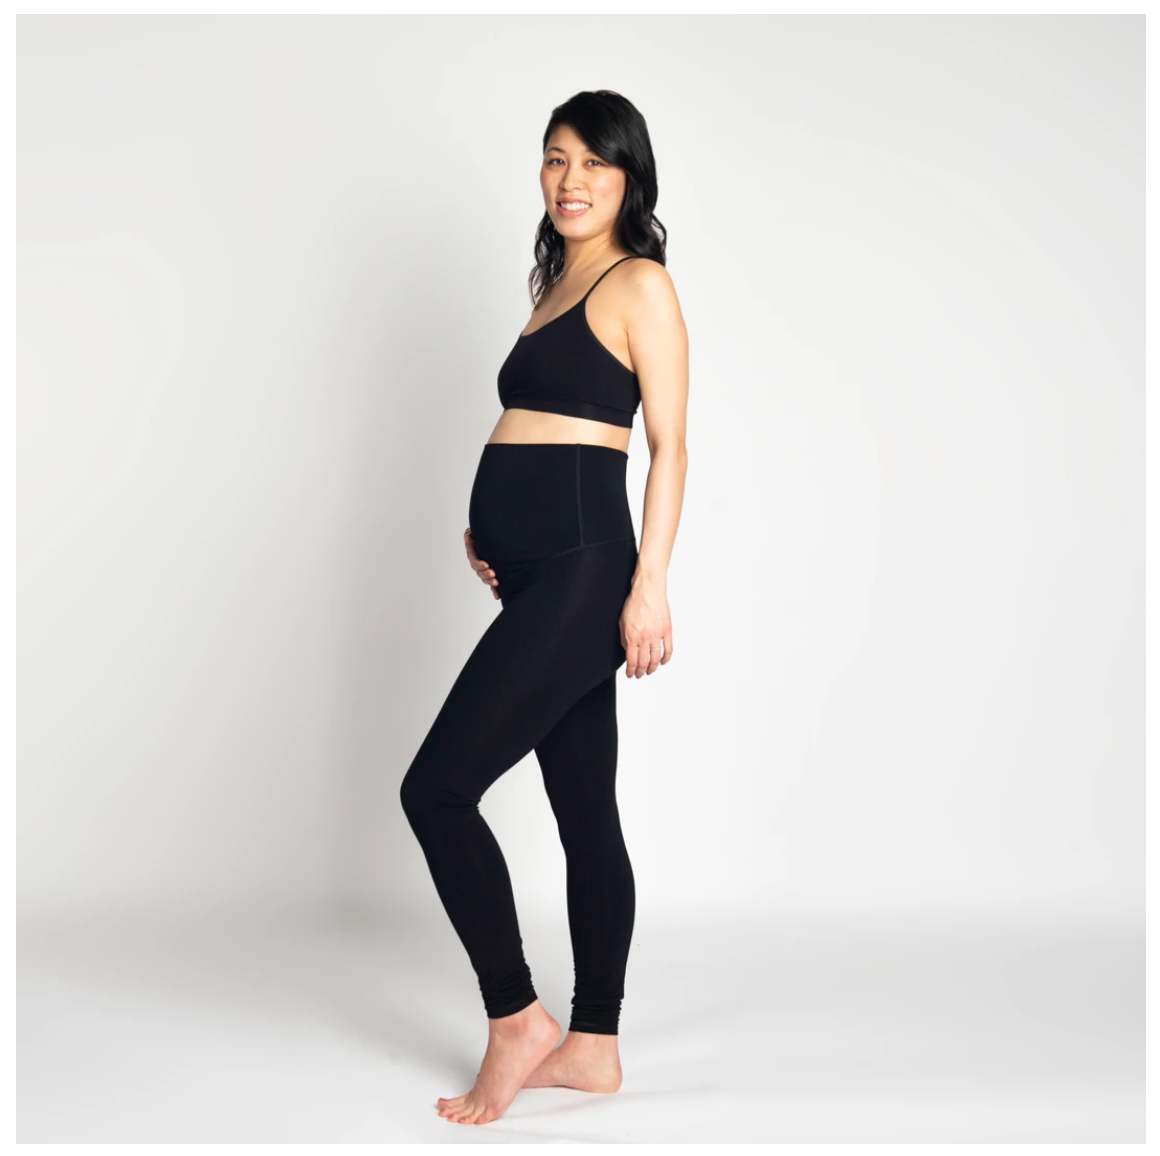 Are Fancy Pregnancy Leggings Worth It? We review Glowe. – A Child Grows